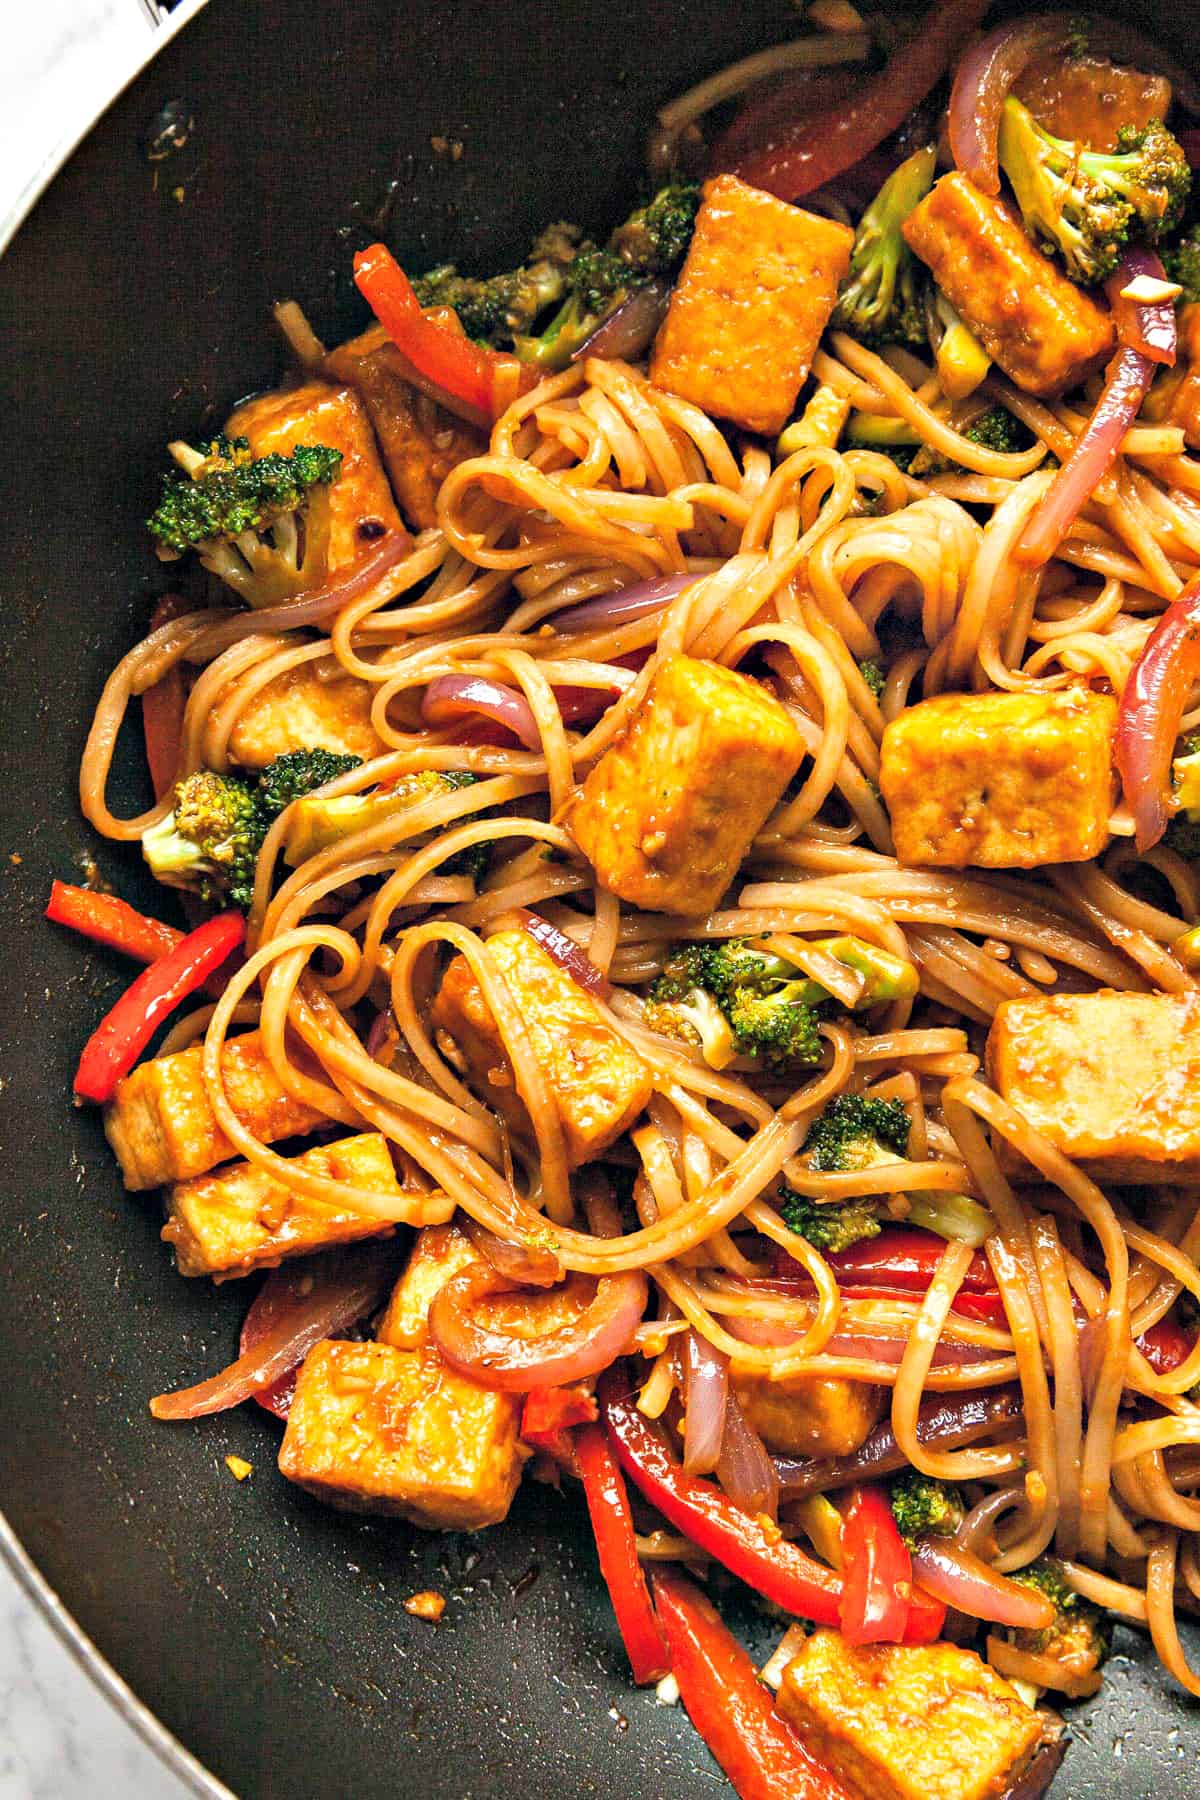 Close up view of fully cooked stir fry in a wok.